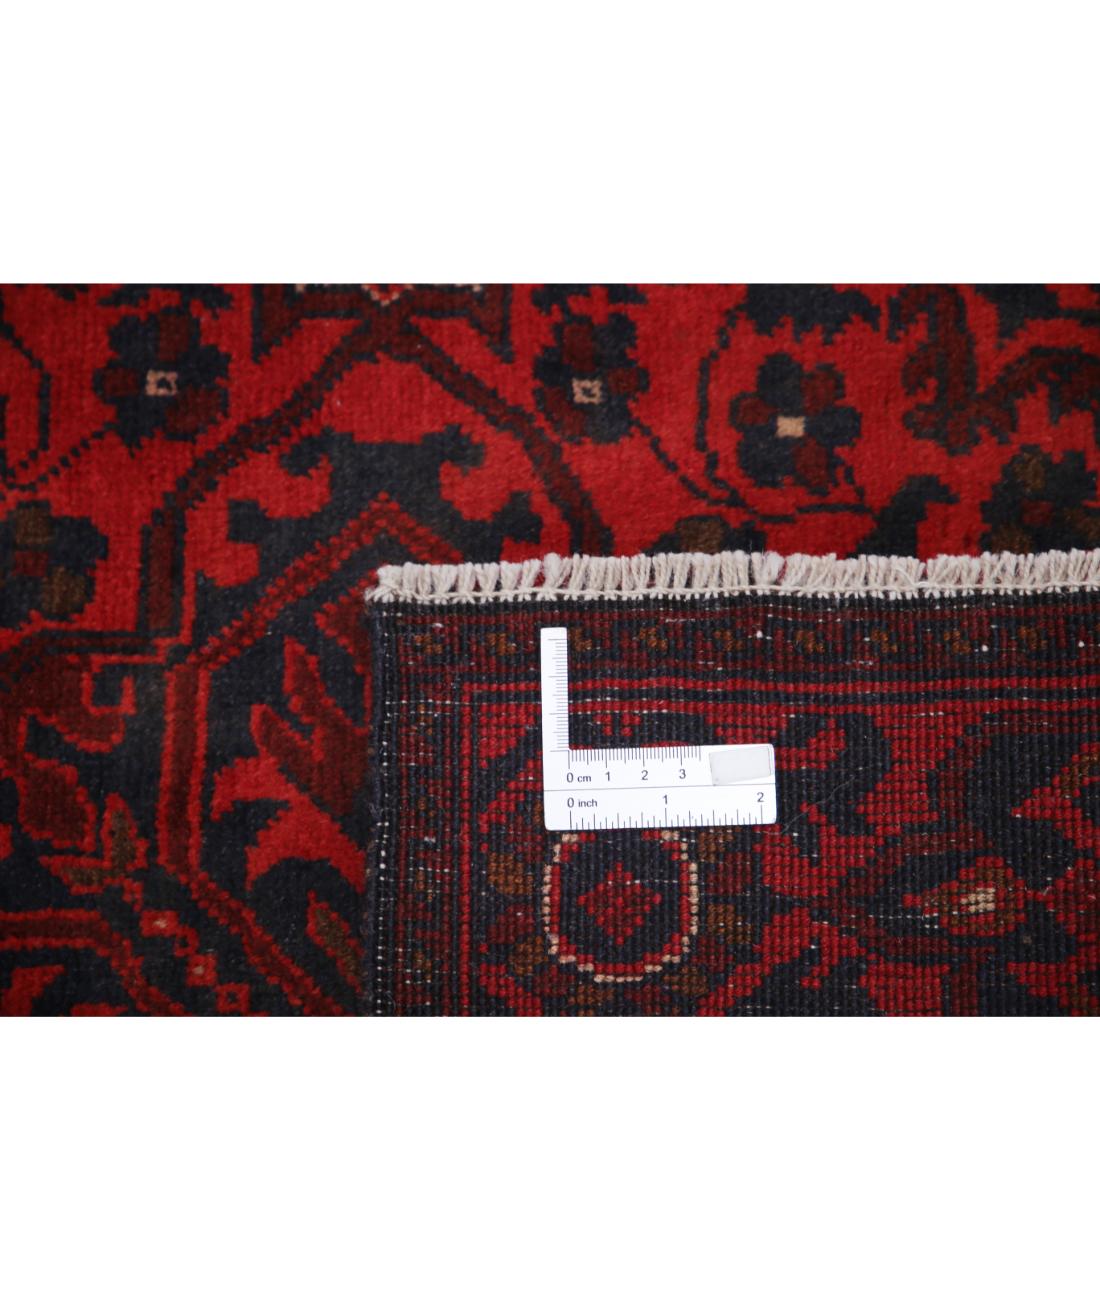 Hand Knotted Afghan Khal Muhammadi Wool Rug - 2'10'' x 6'7'' 2' 10" X 6' 7" (86 X 201) / Red / Blue